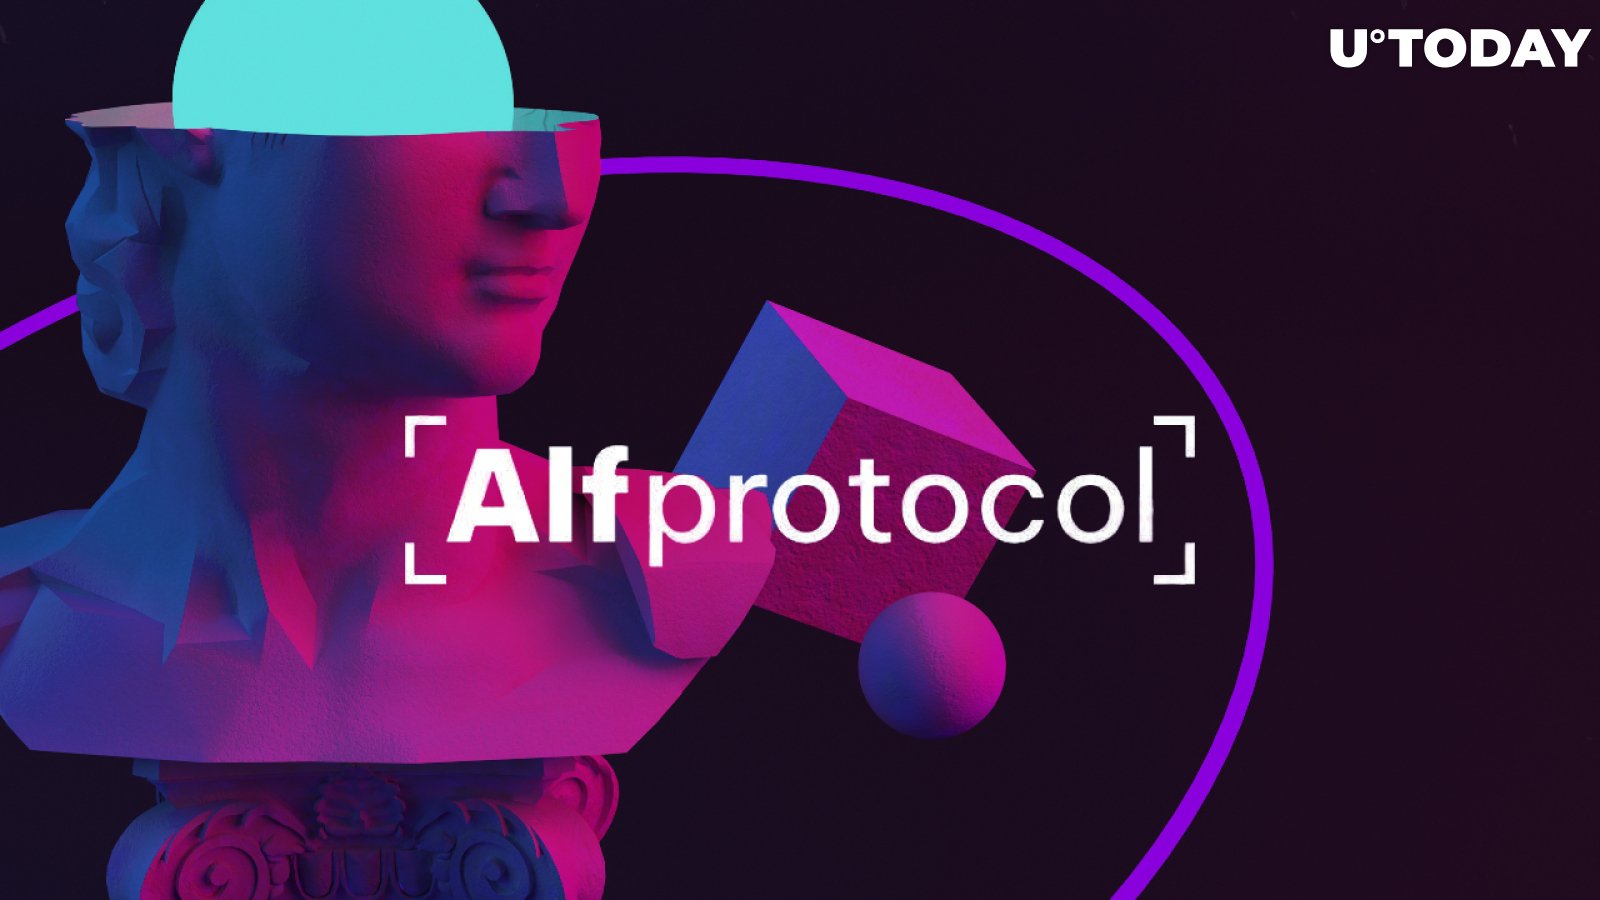 Alfprotocol Presents High-Leveraged Products Powered by Solana Blockchain